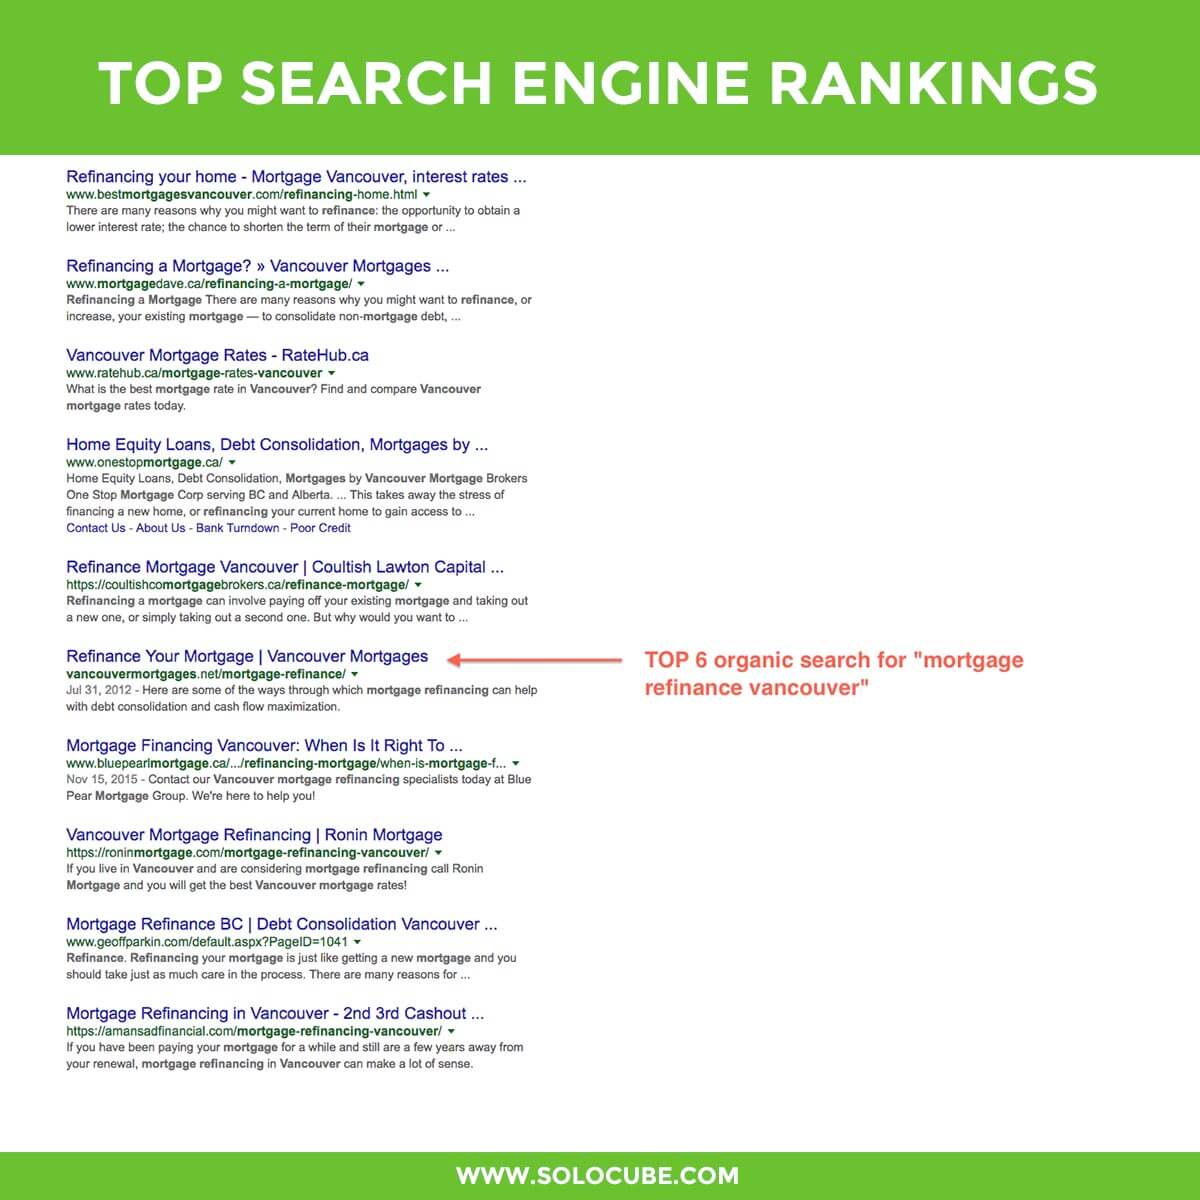 top SEO google ranking by solocube 09 - Chiropractor SEO